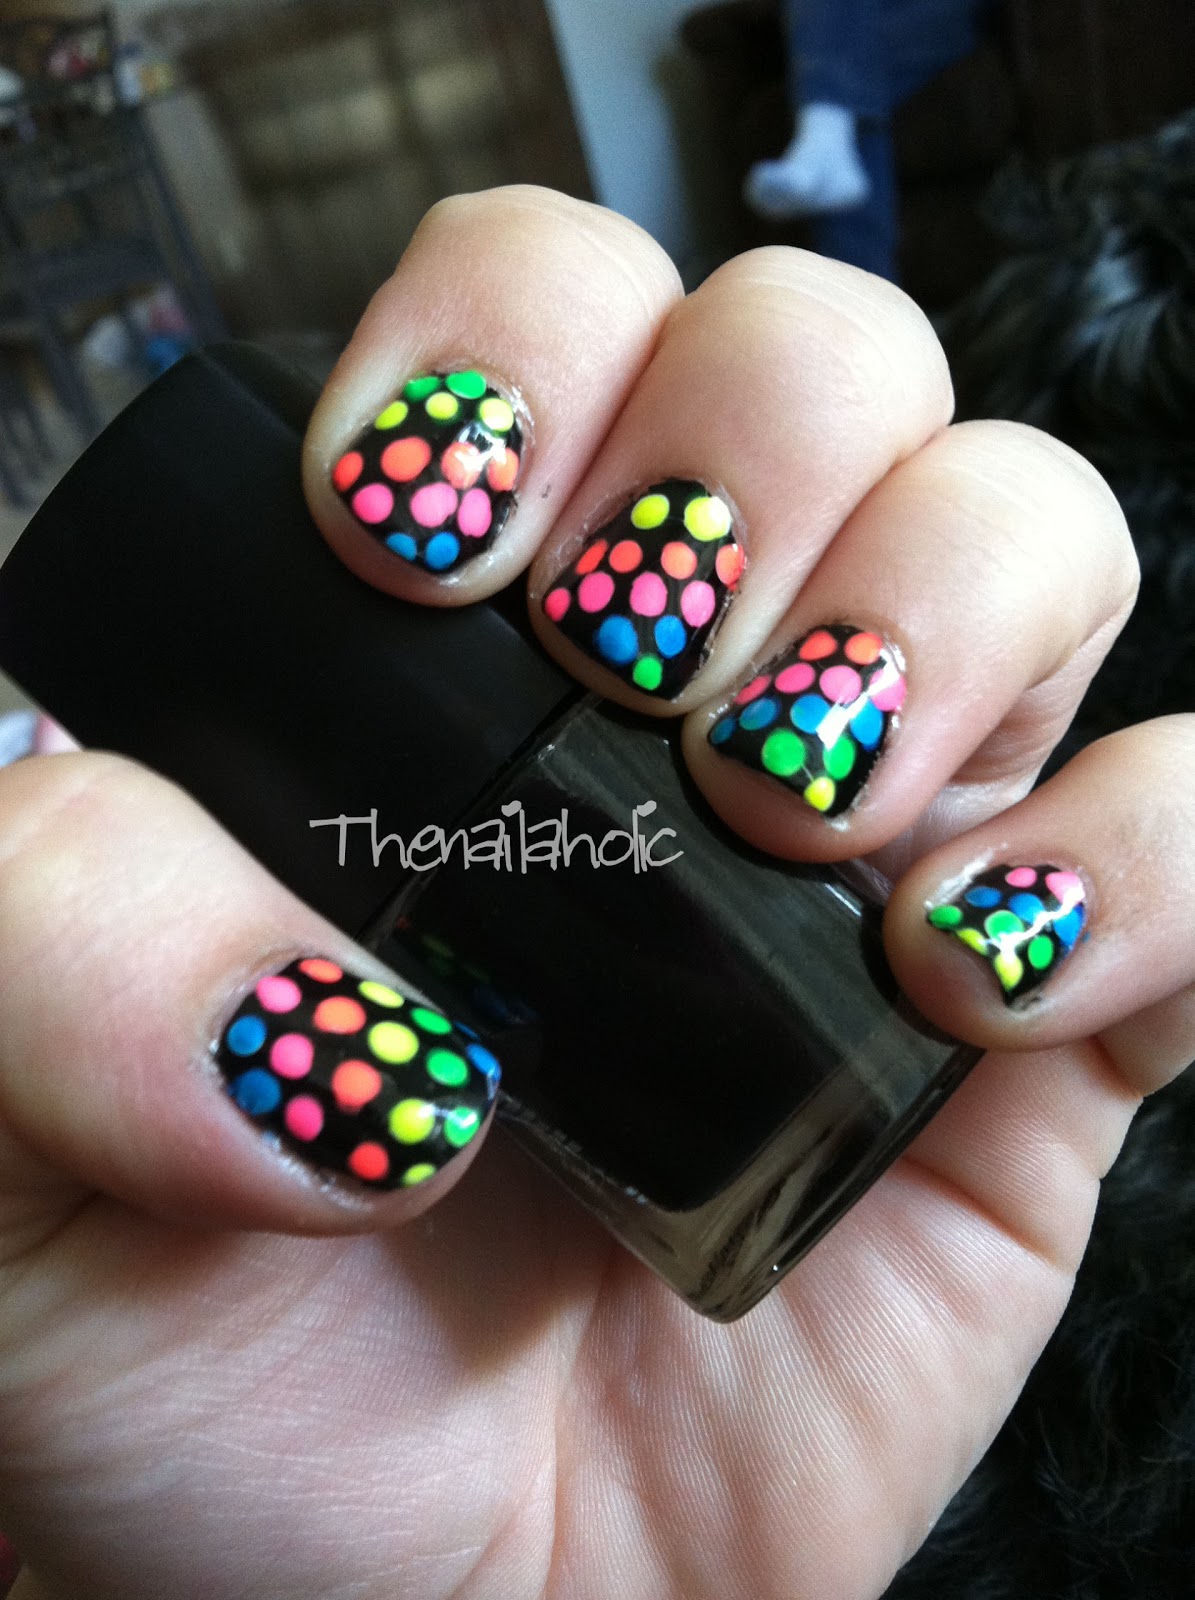 The Nailaholic: I'm Seeing Dots!